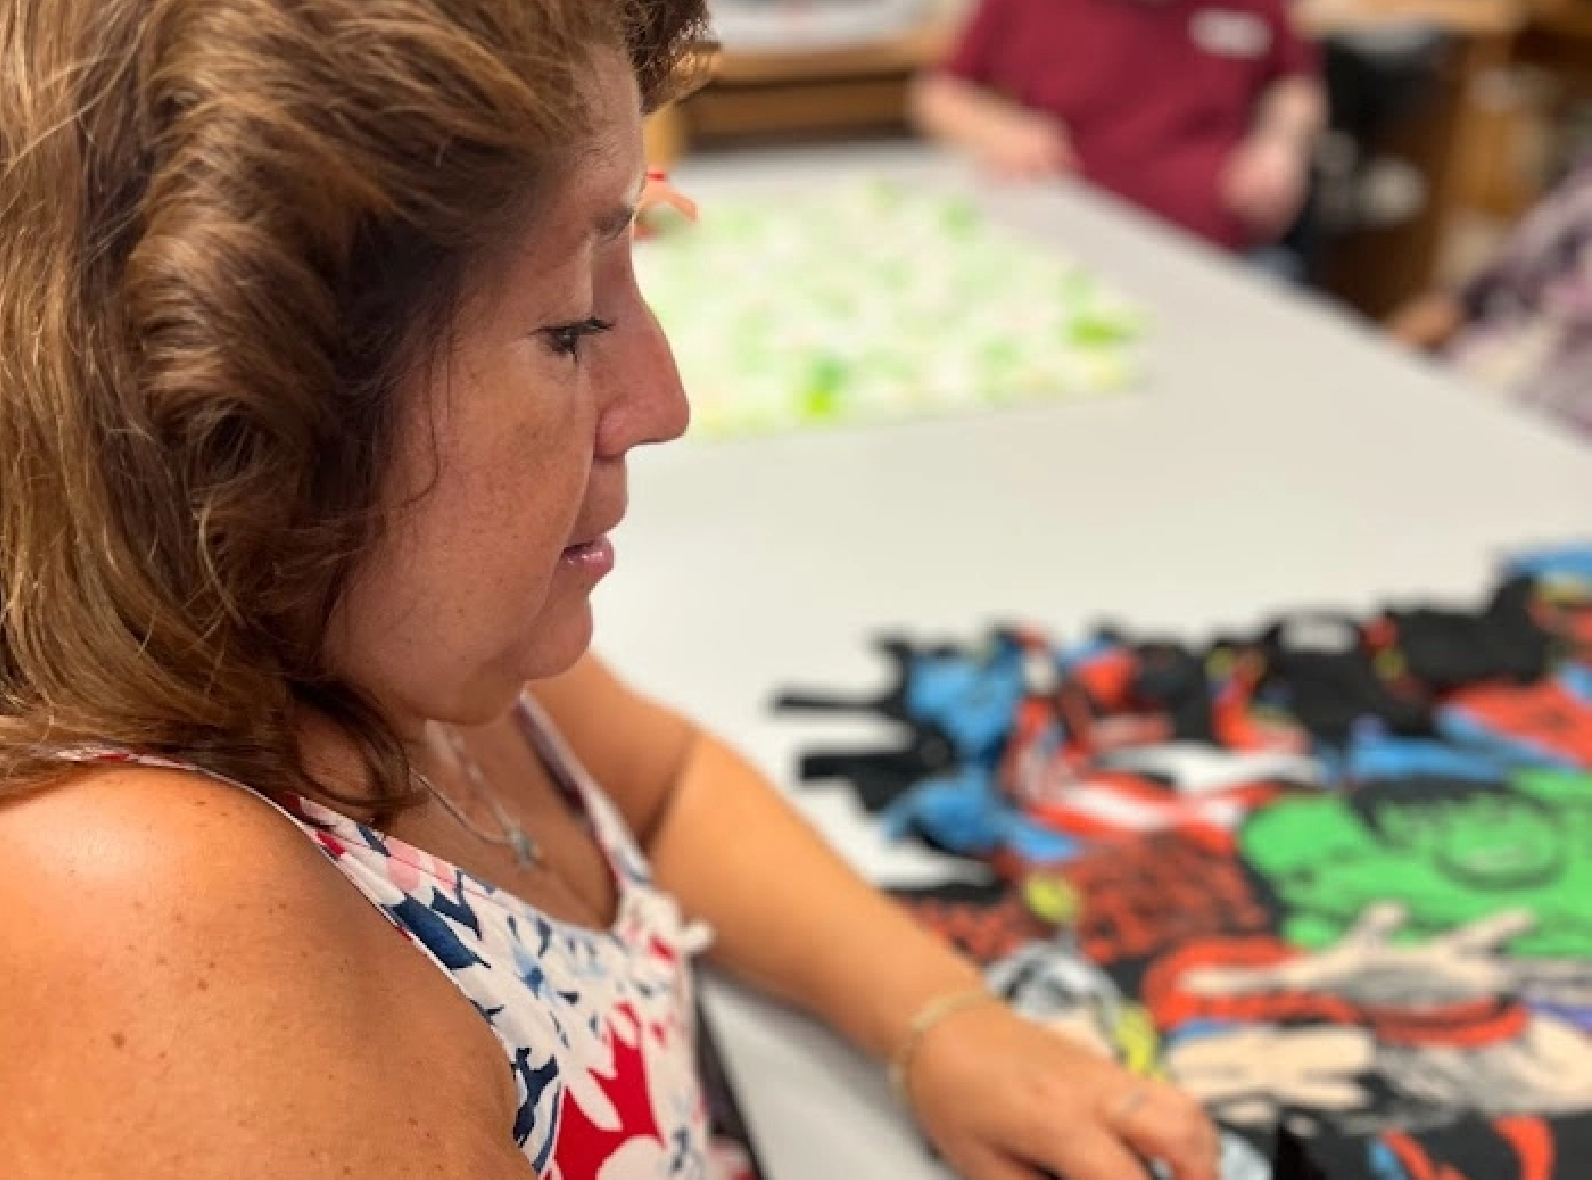 brunette visually impaired woman working on art project